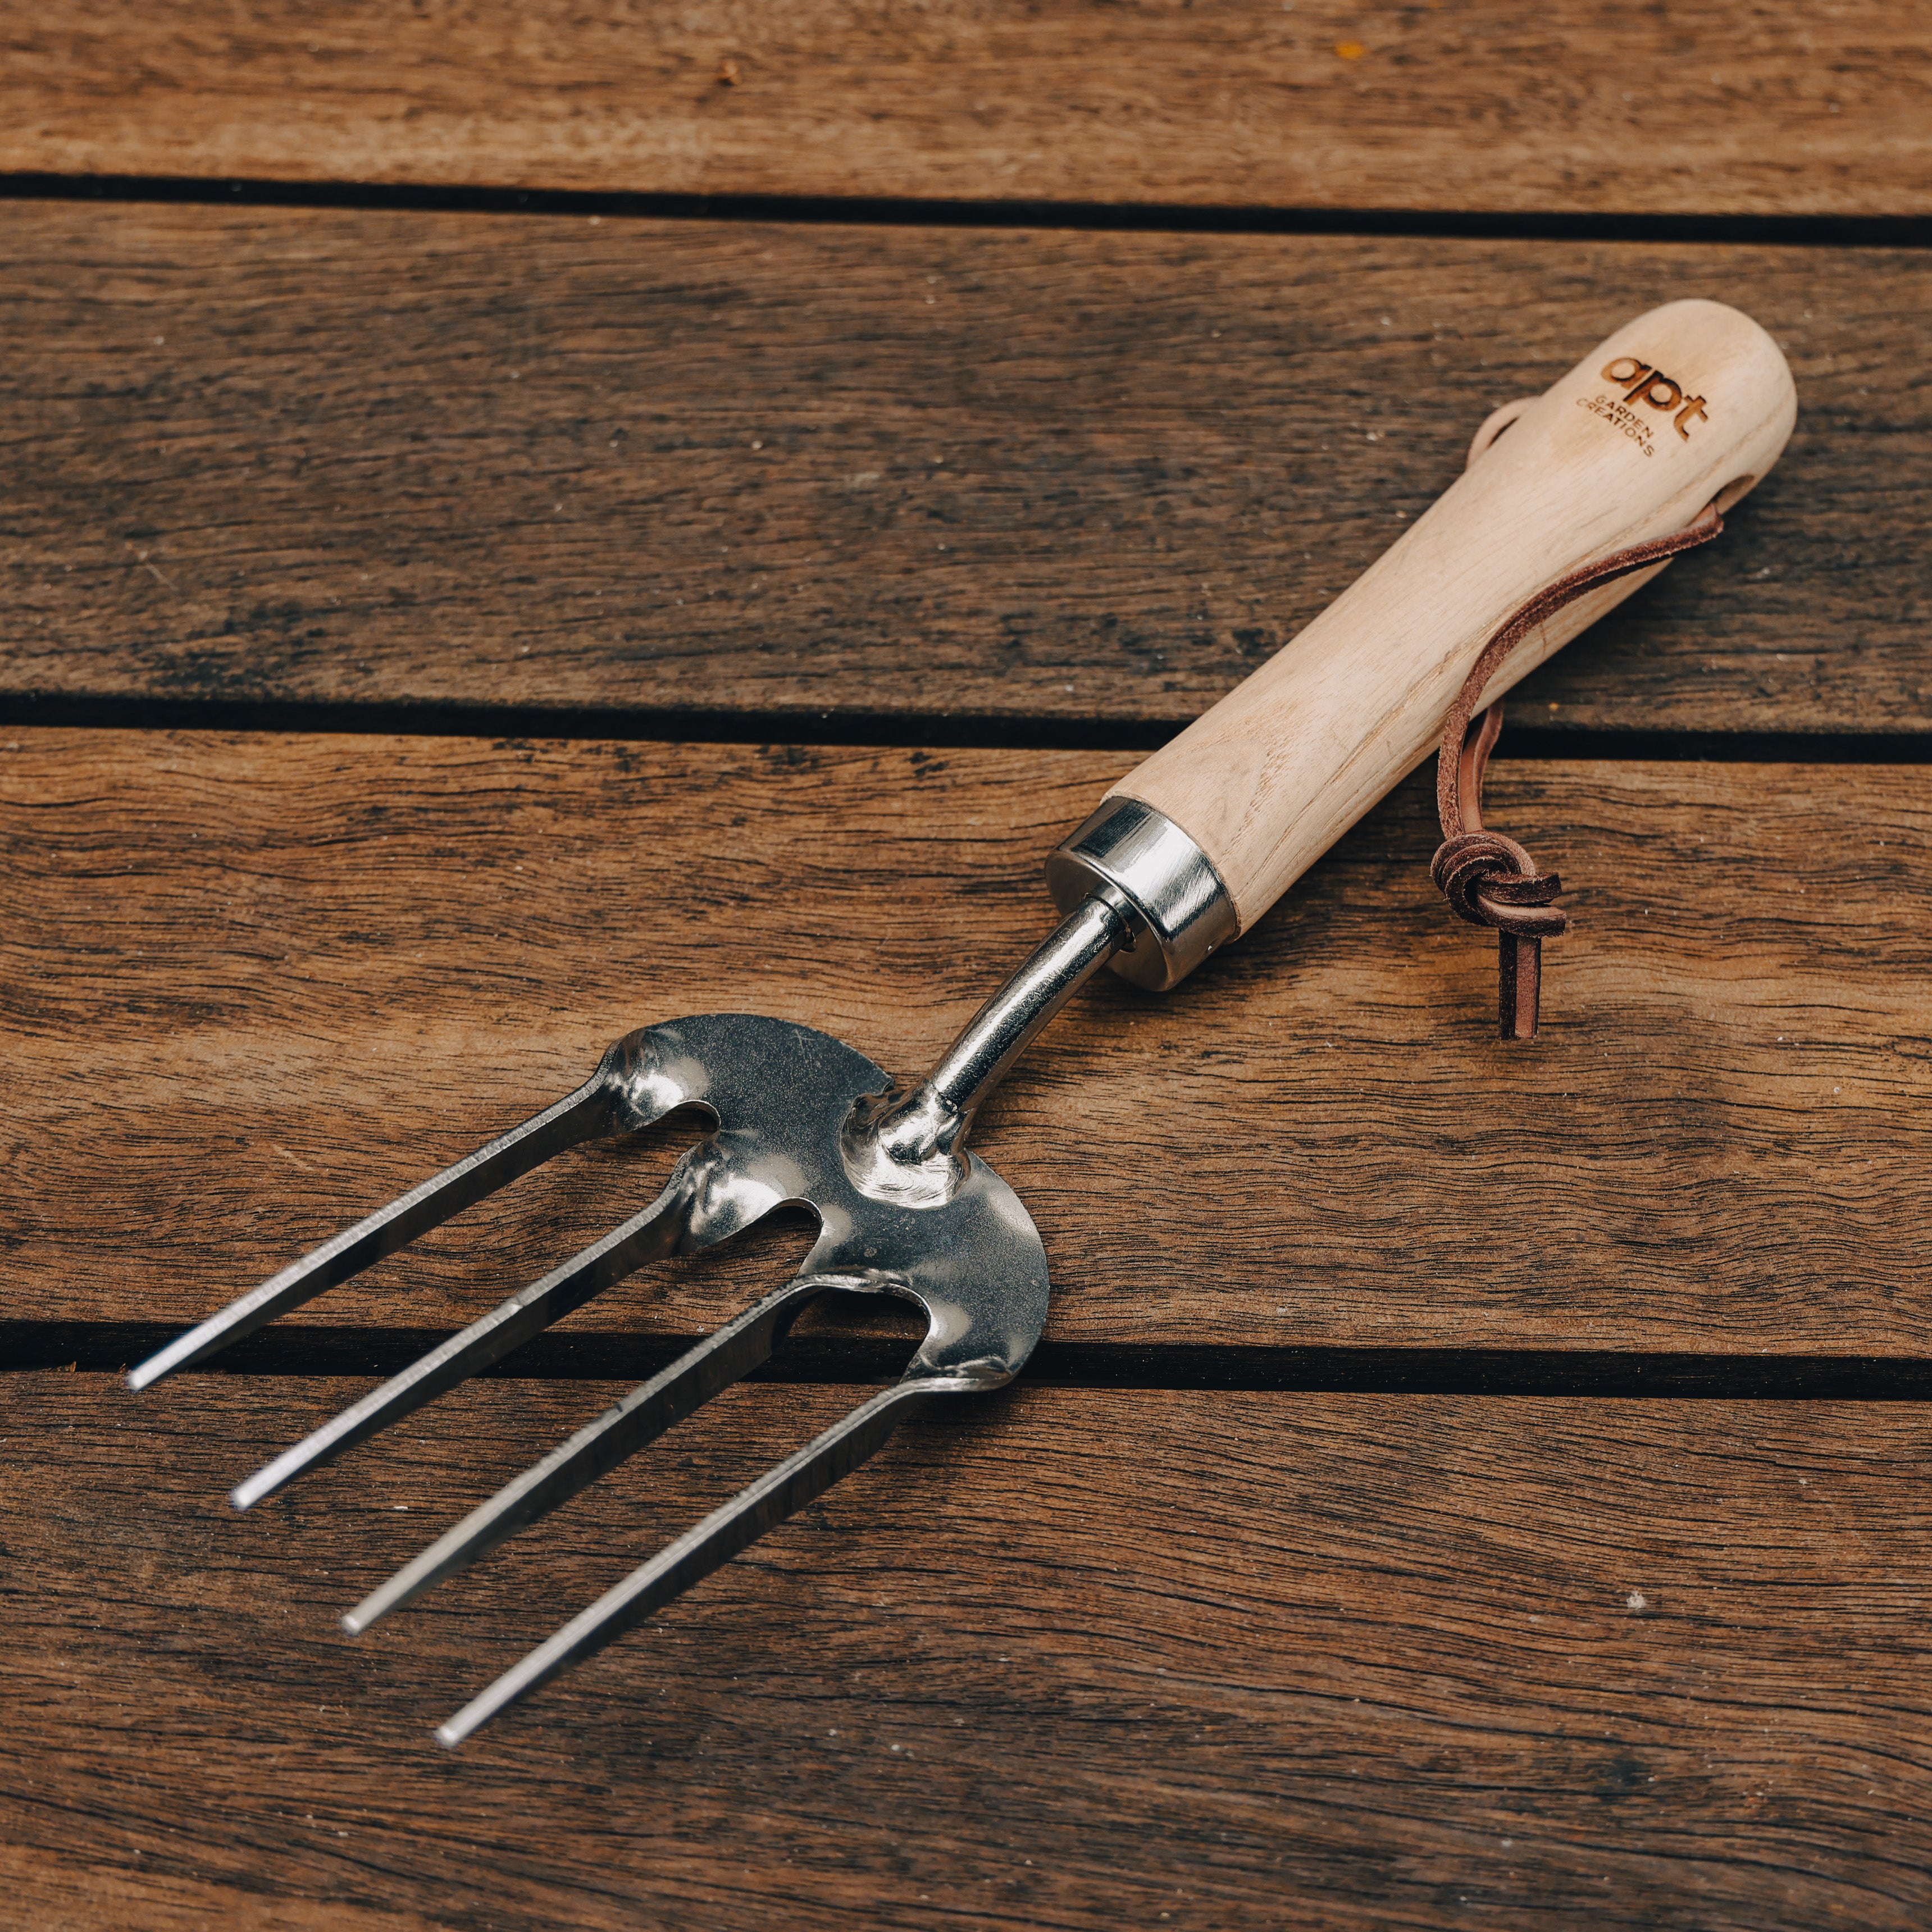 This stunning set of two garden tools, featuring ash-wood handles and stainless steel heads, a leather hang-strap and stylishly engraved with our Apt Garden Creations logo.